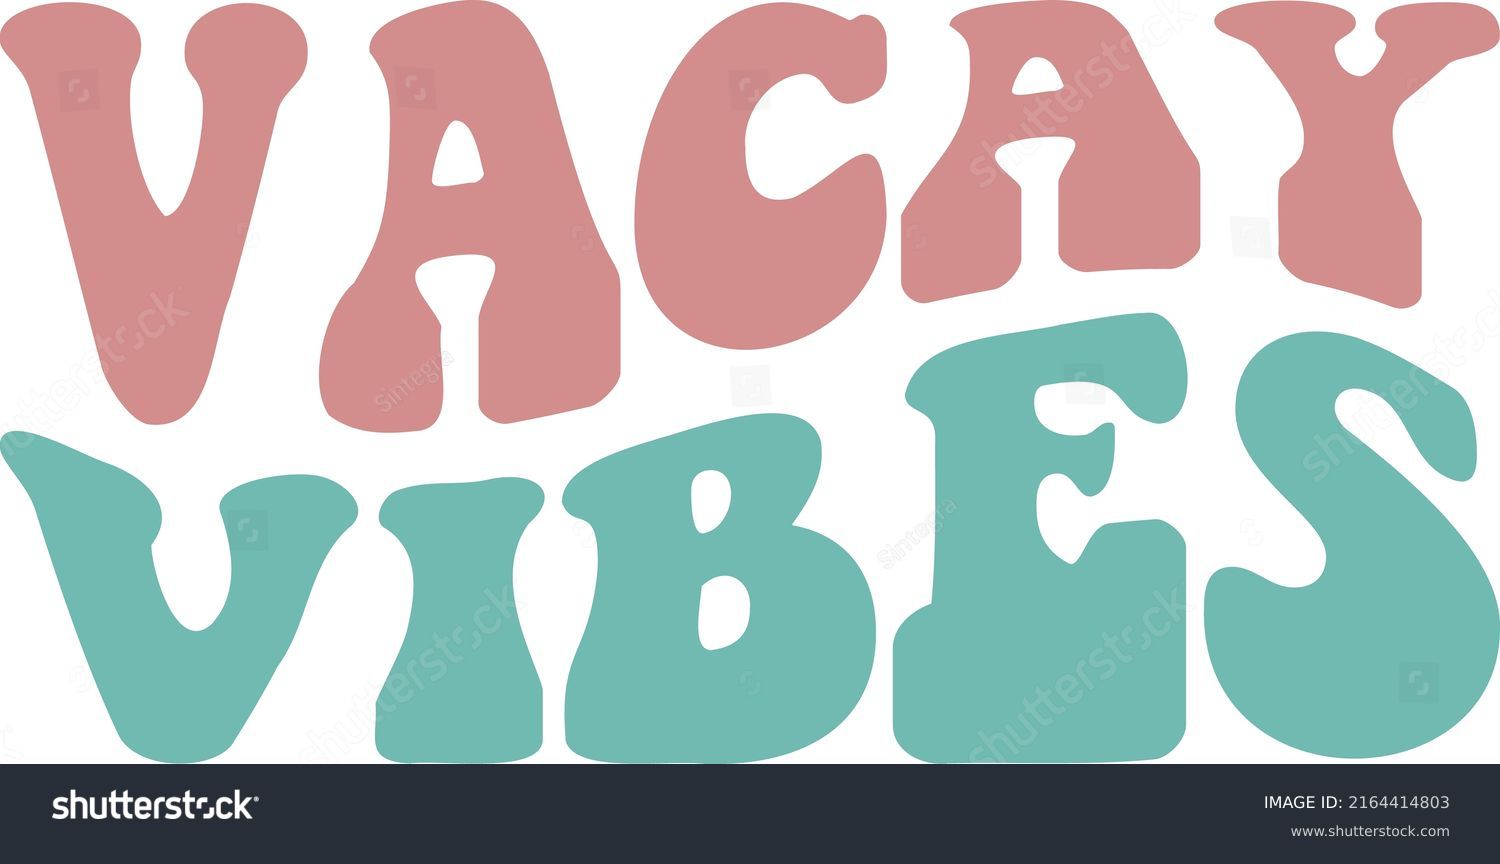 SVG of Vacay Vibes File is suitable for t-shirt, Summer quote, Summer saying, Summer Vibes, Beach Vibes, Summer, Vacation, Beach quote, Beach saying, Stacked quote, Traveling quote, crafts  etc. svg